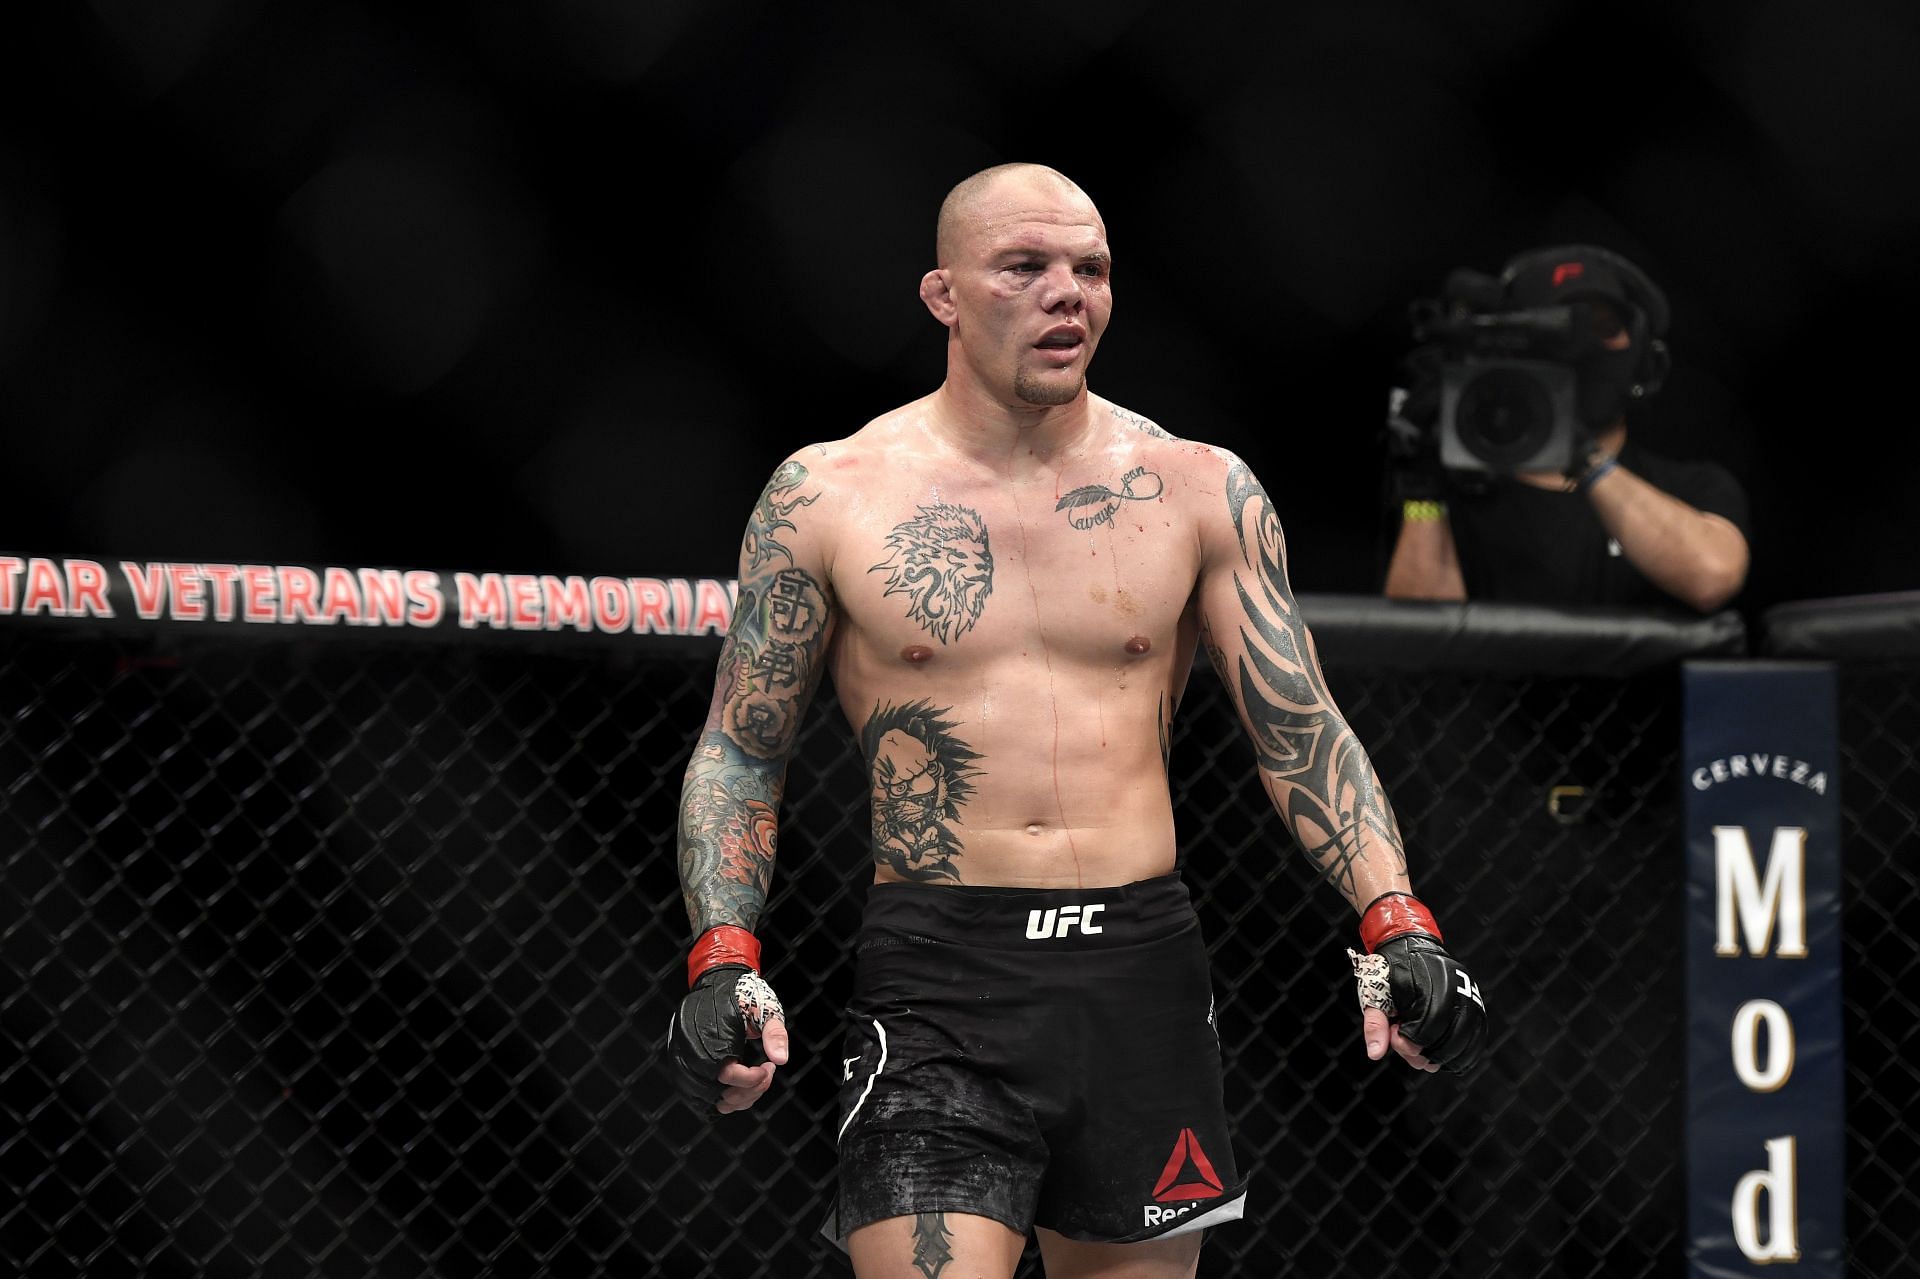 Anthony Smith is set to fight Magomed Ankalaev at UFC 277